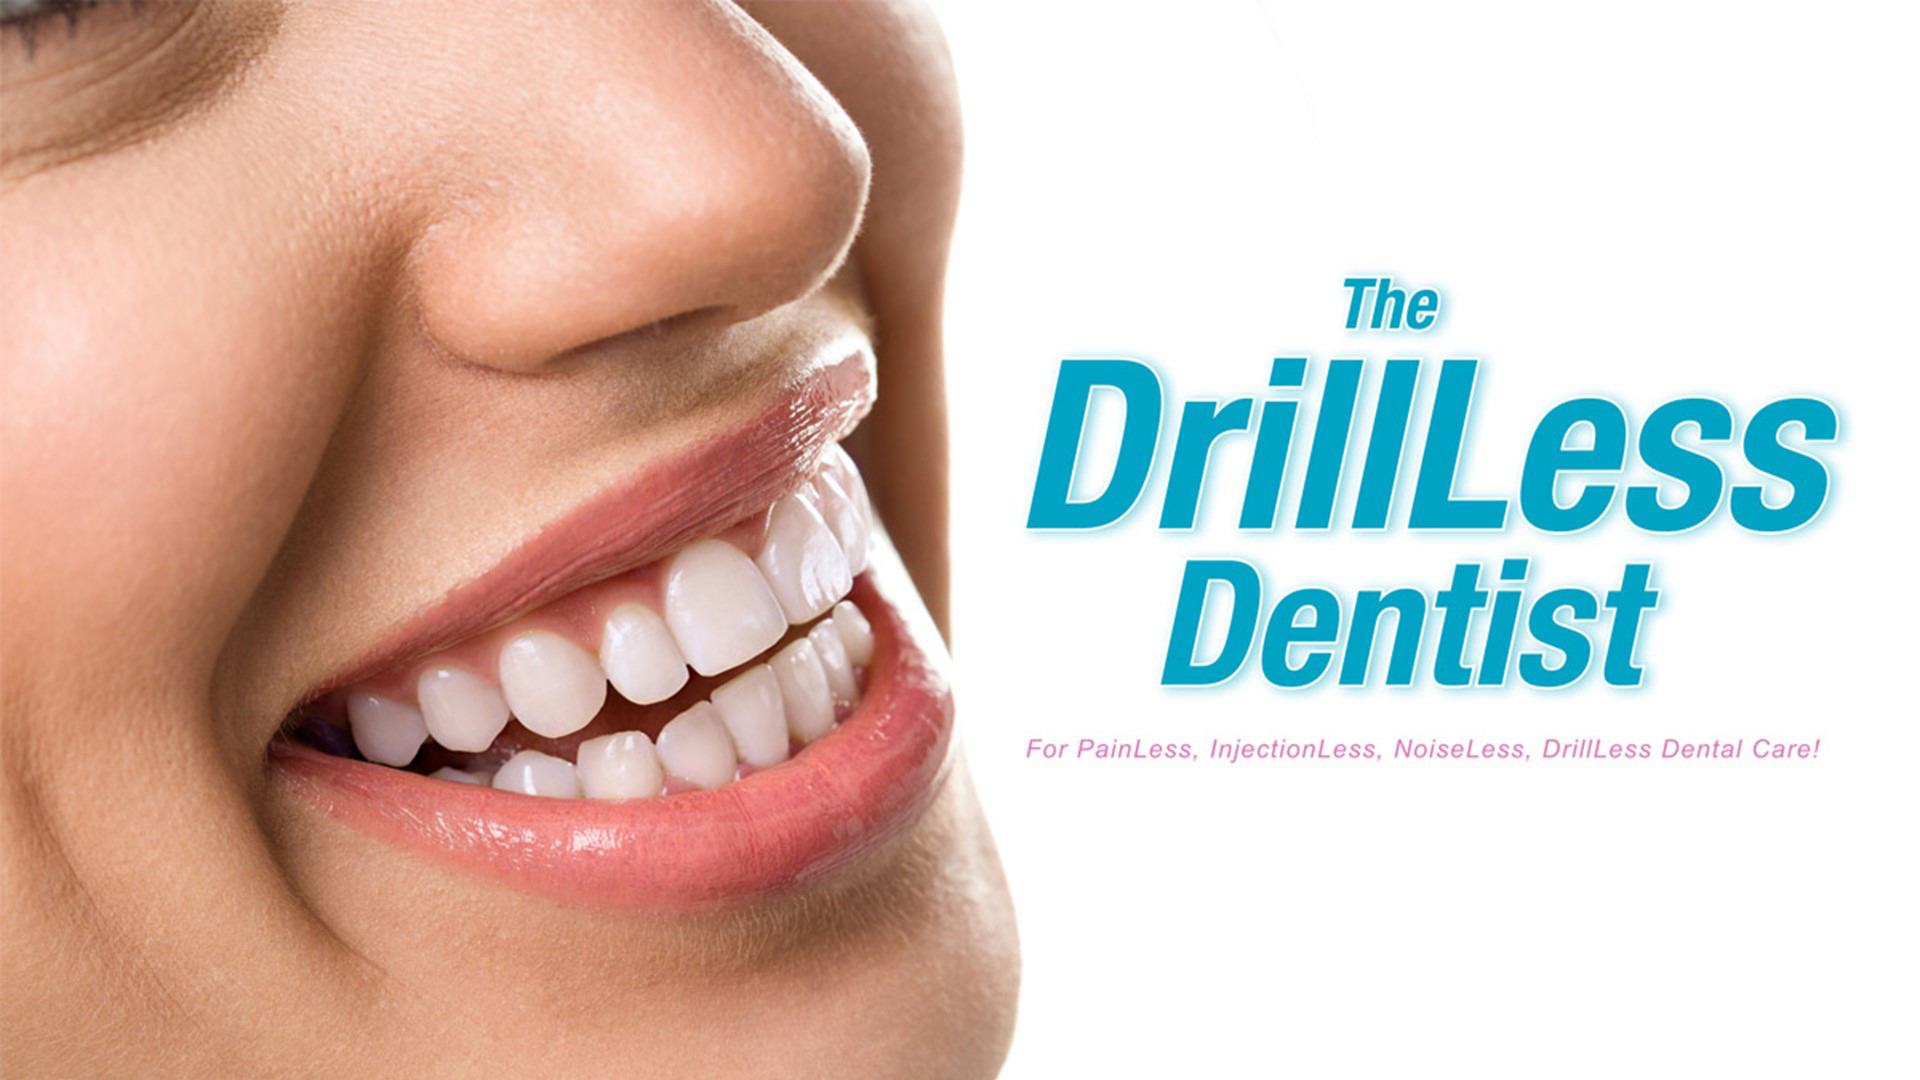 Alan Pressman DMD on Tumblr: Finding Relief: A Guide to Emergency Dentists in Rockland County